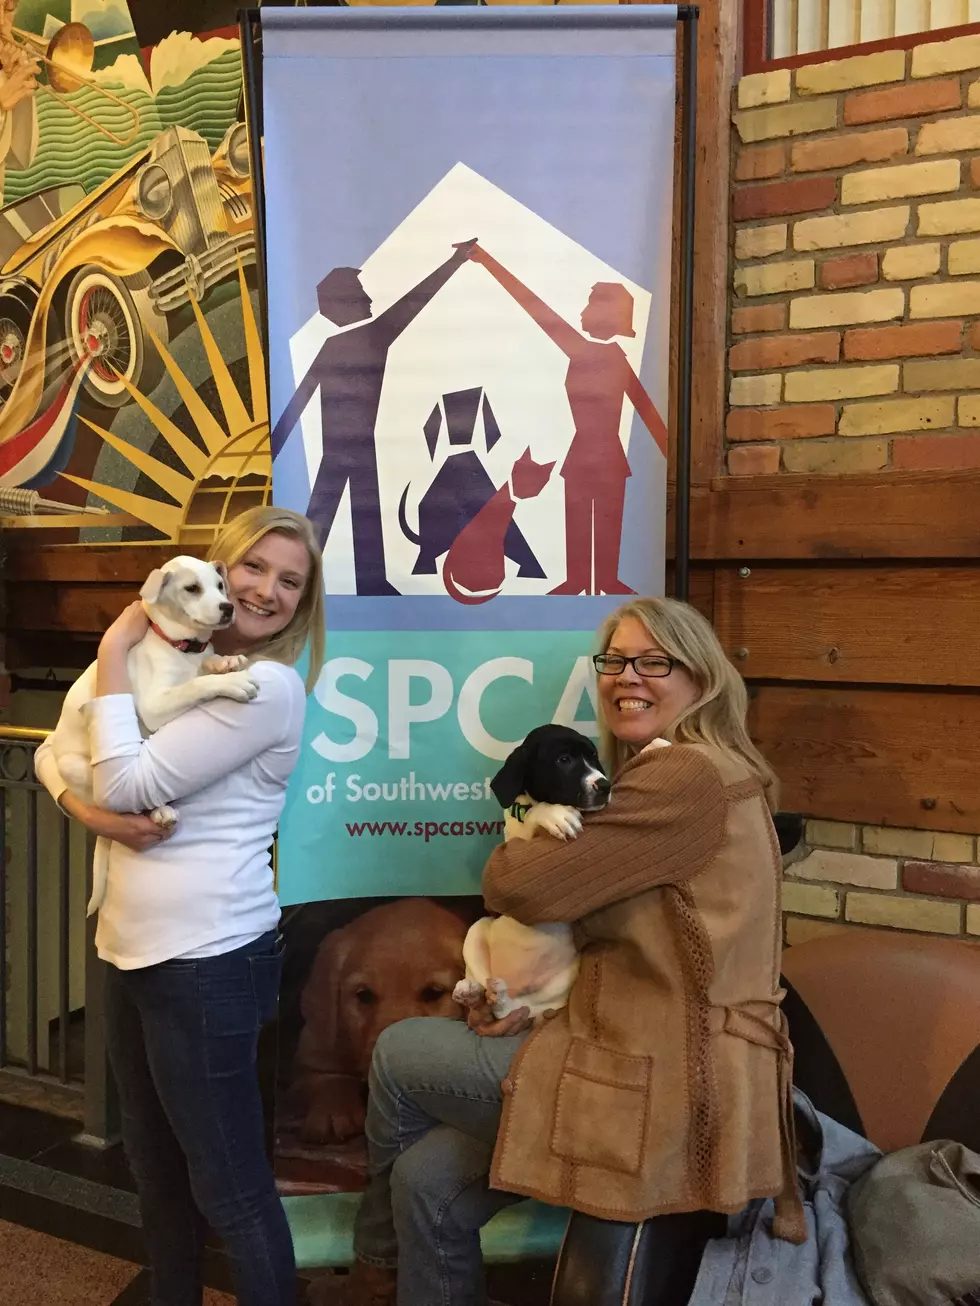 The SPCA Held A Fund Raiser At The Beer Exchange In Kalamazoo But The Puppies Stole The Show